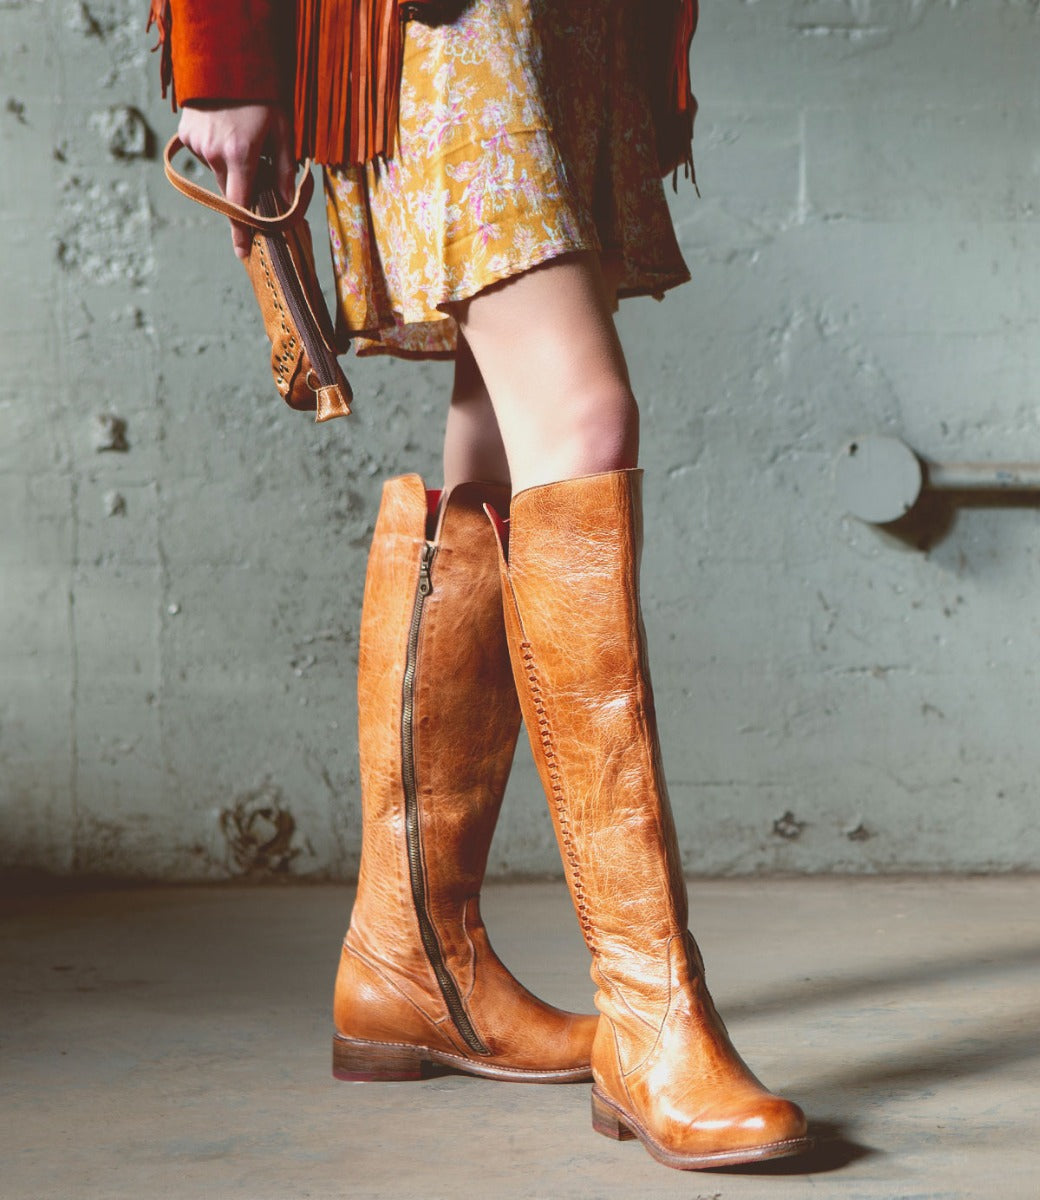 A woman wearing Bed Stu Letizia tan leather boots and a purse.